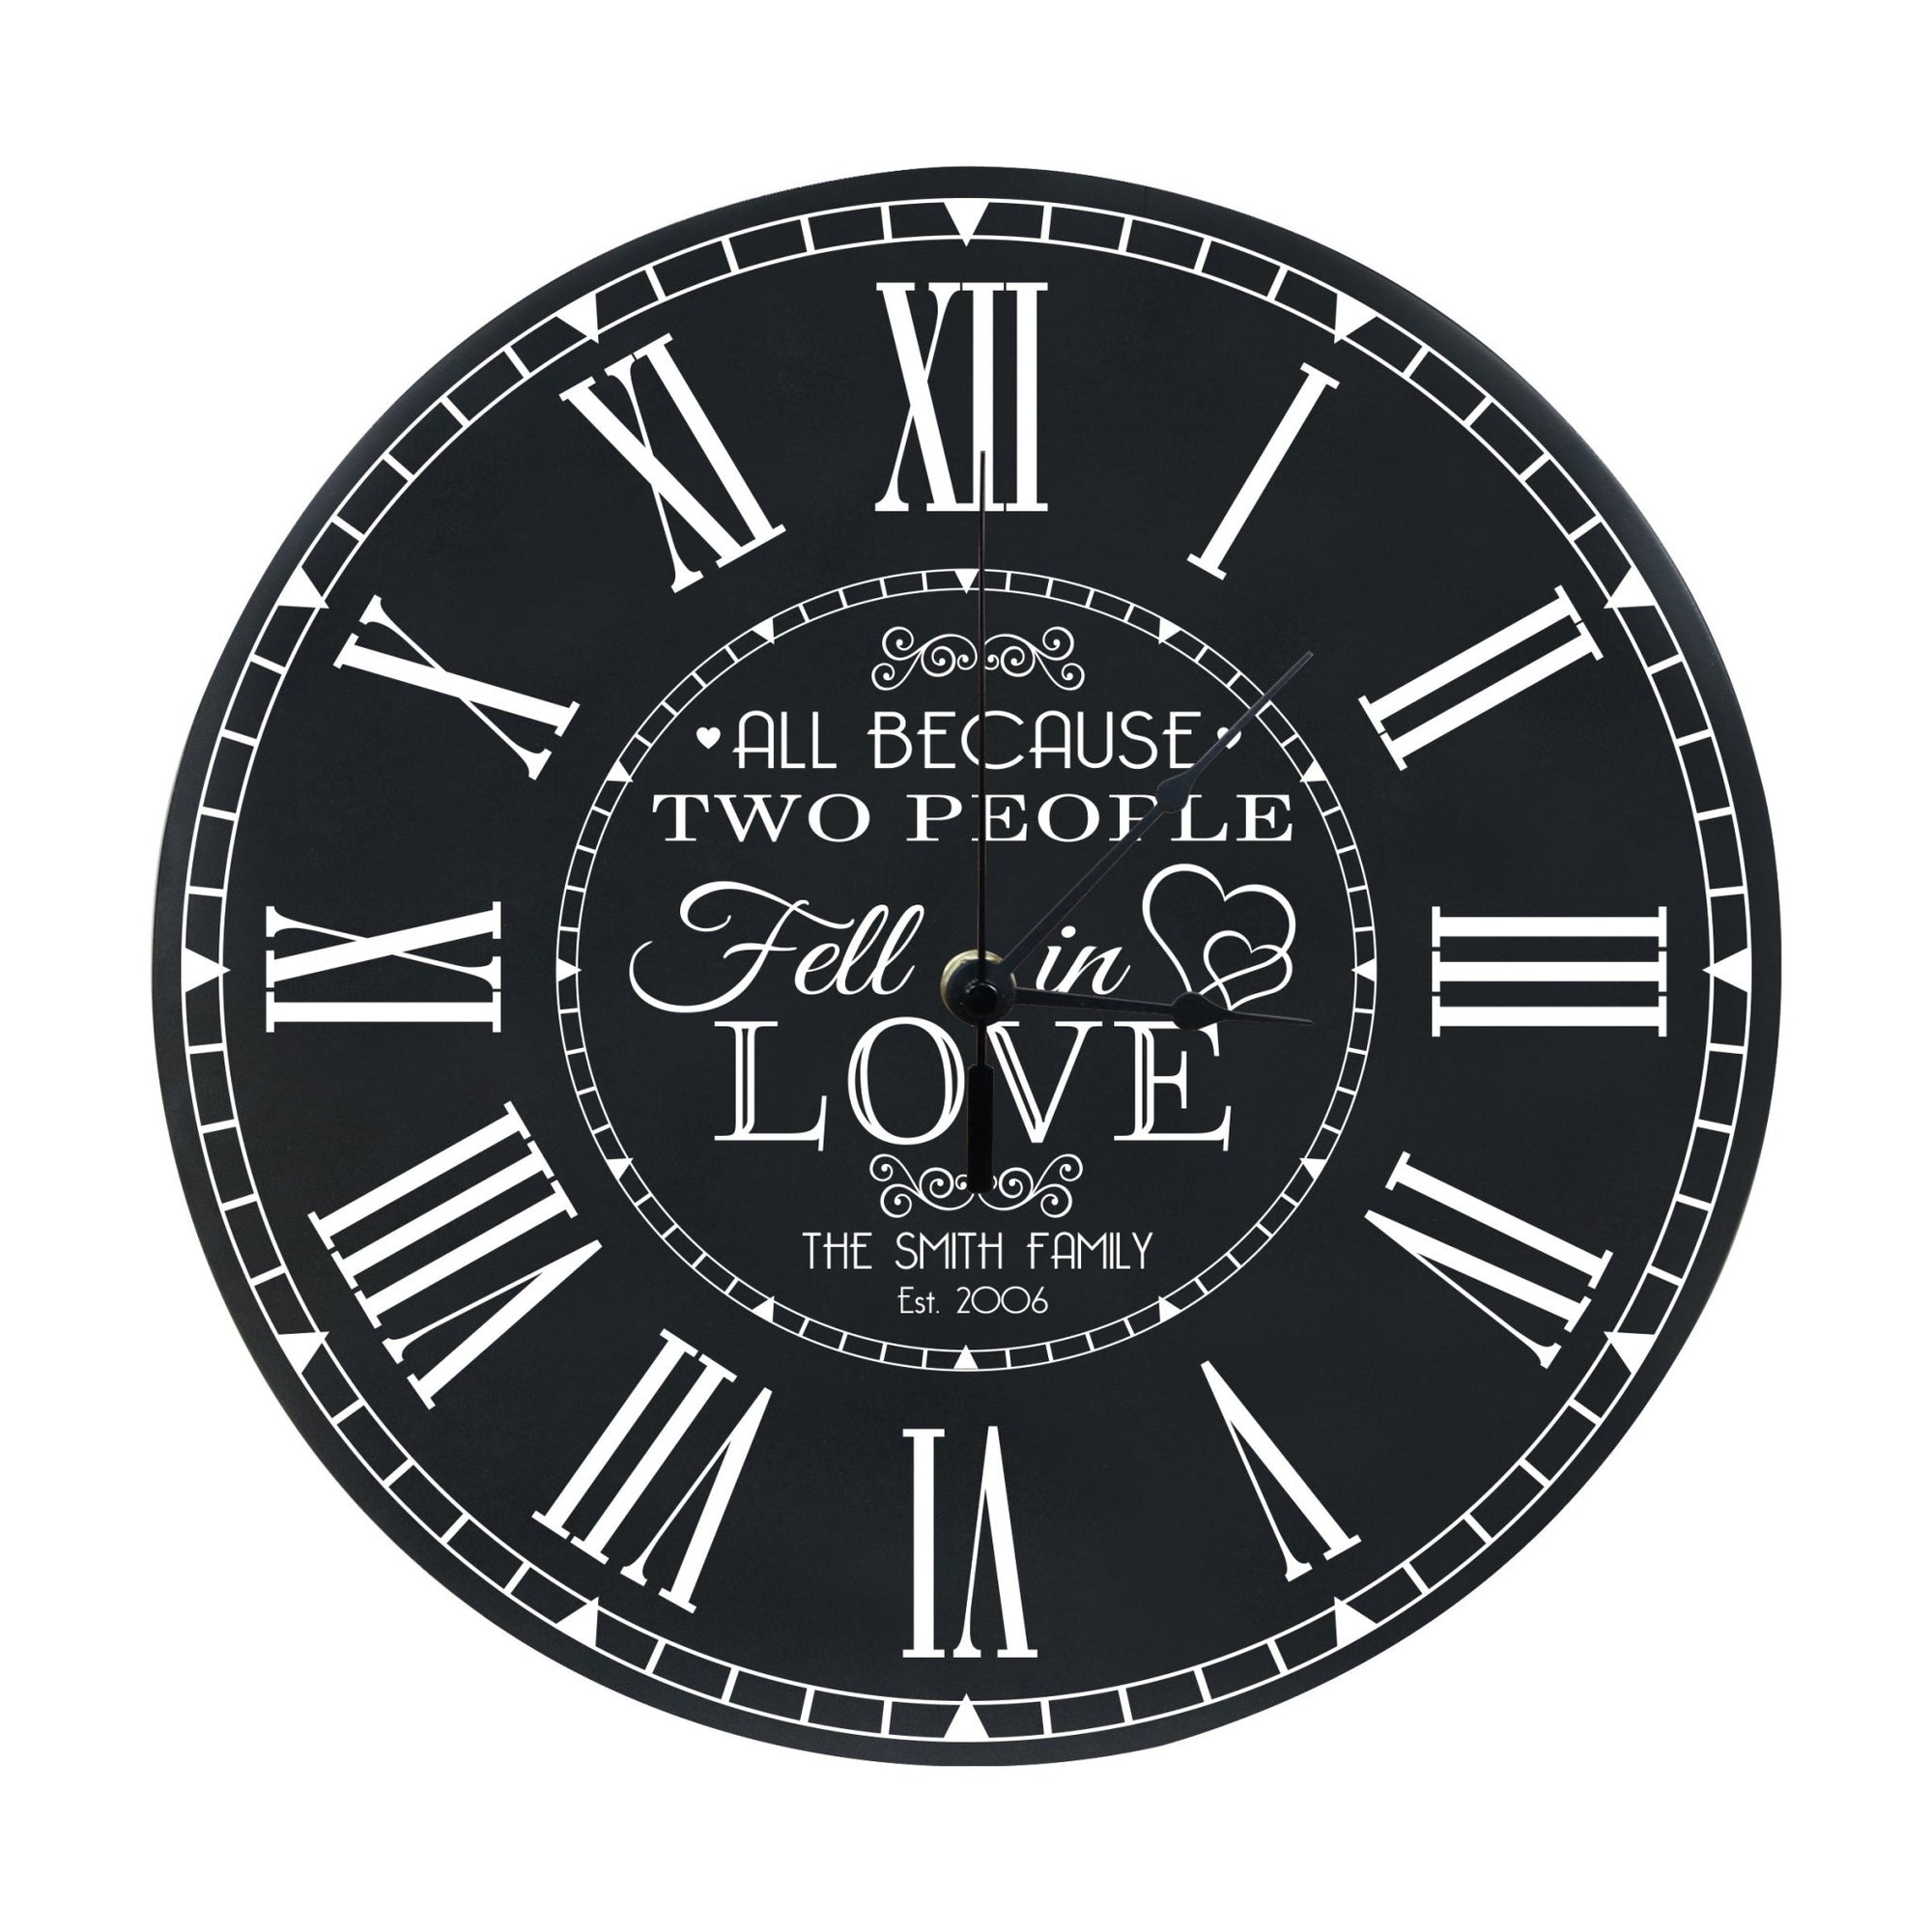 Personalized Everyday Home and Family Clocks - All Because Two People Fell In Love - LifeSong Milestones